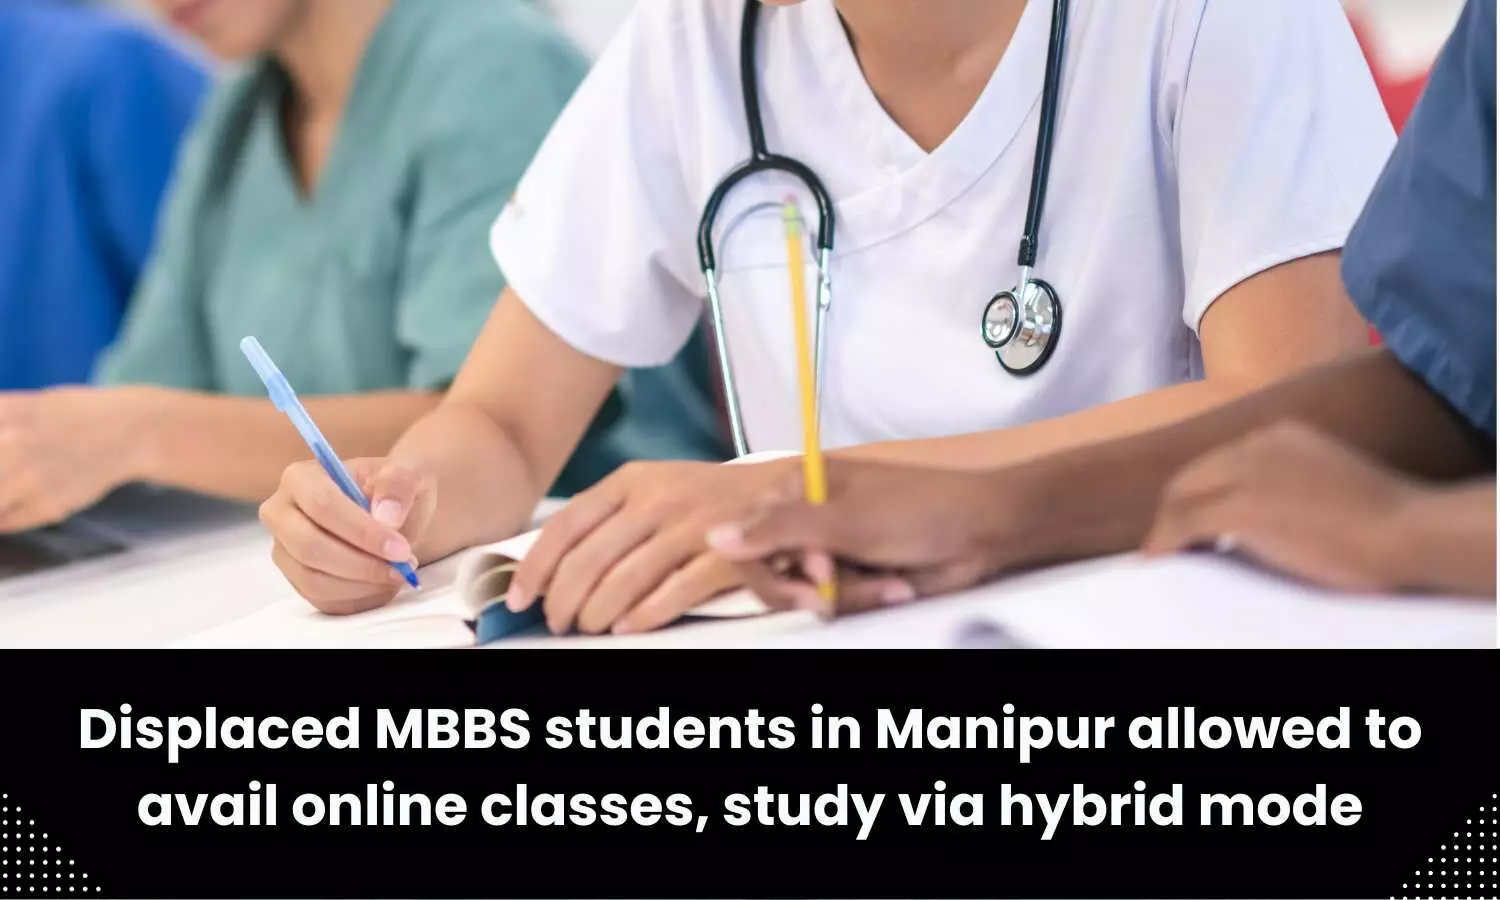 NMC allows displaced medical students in Manipur to continue studies online or through hybrid mode